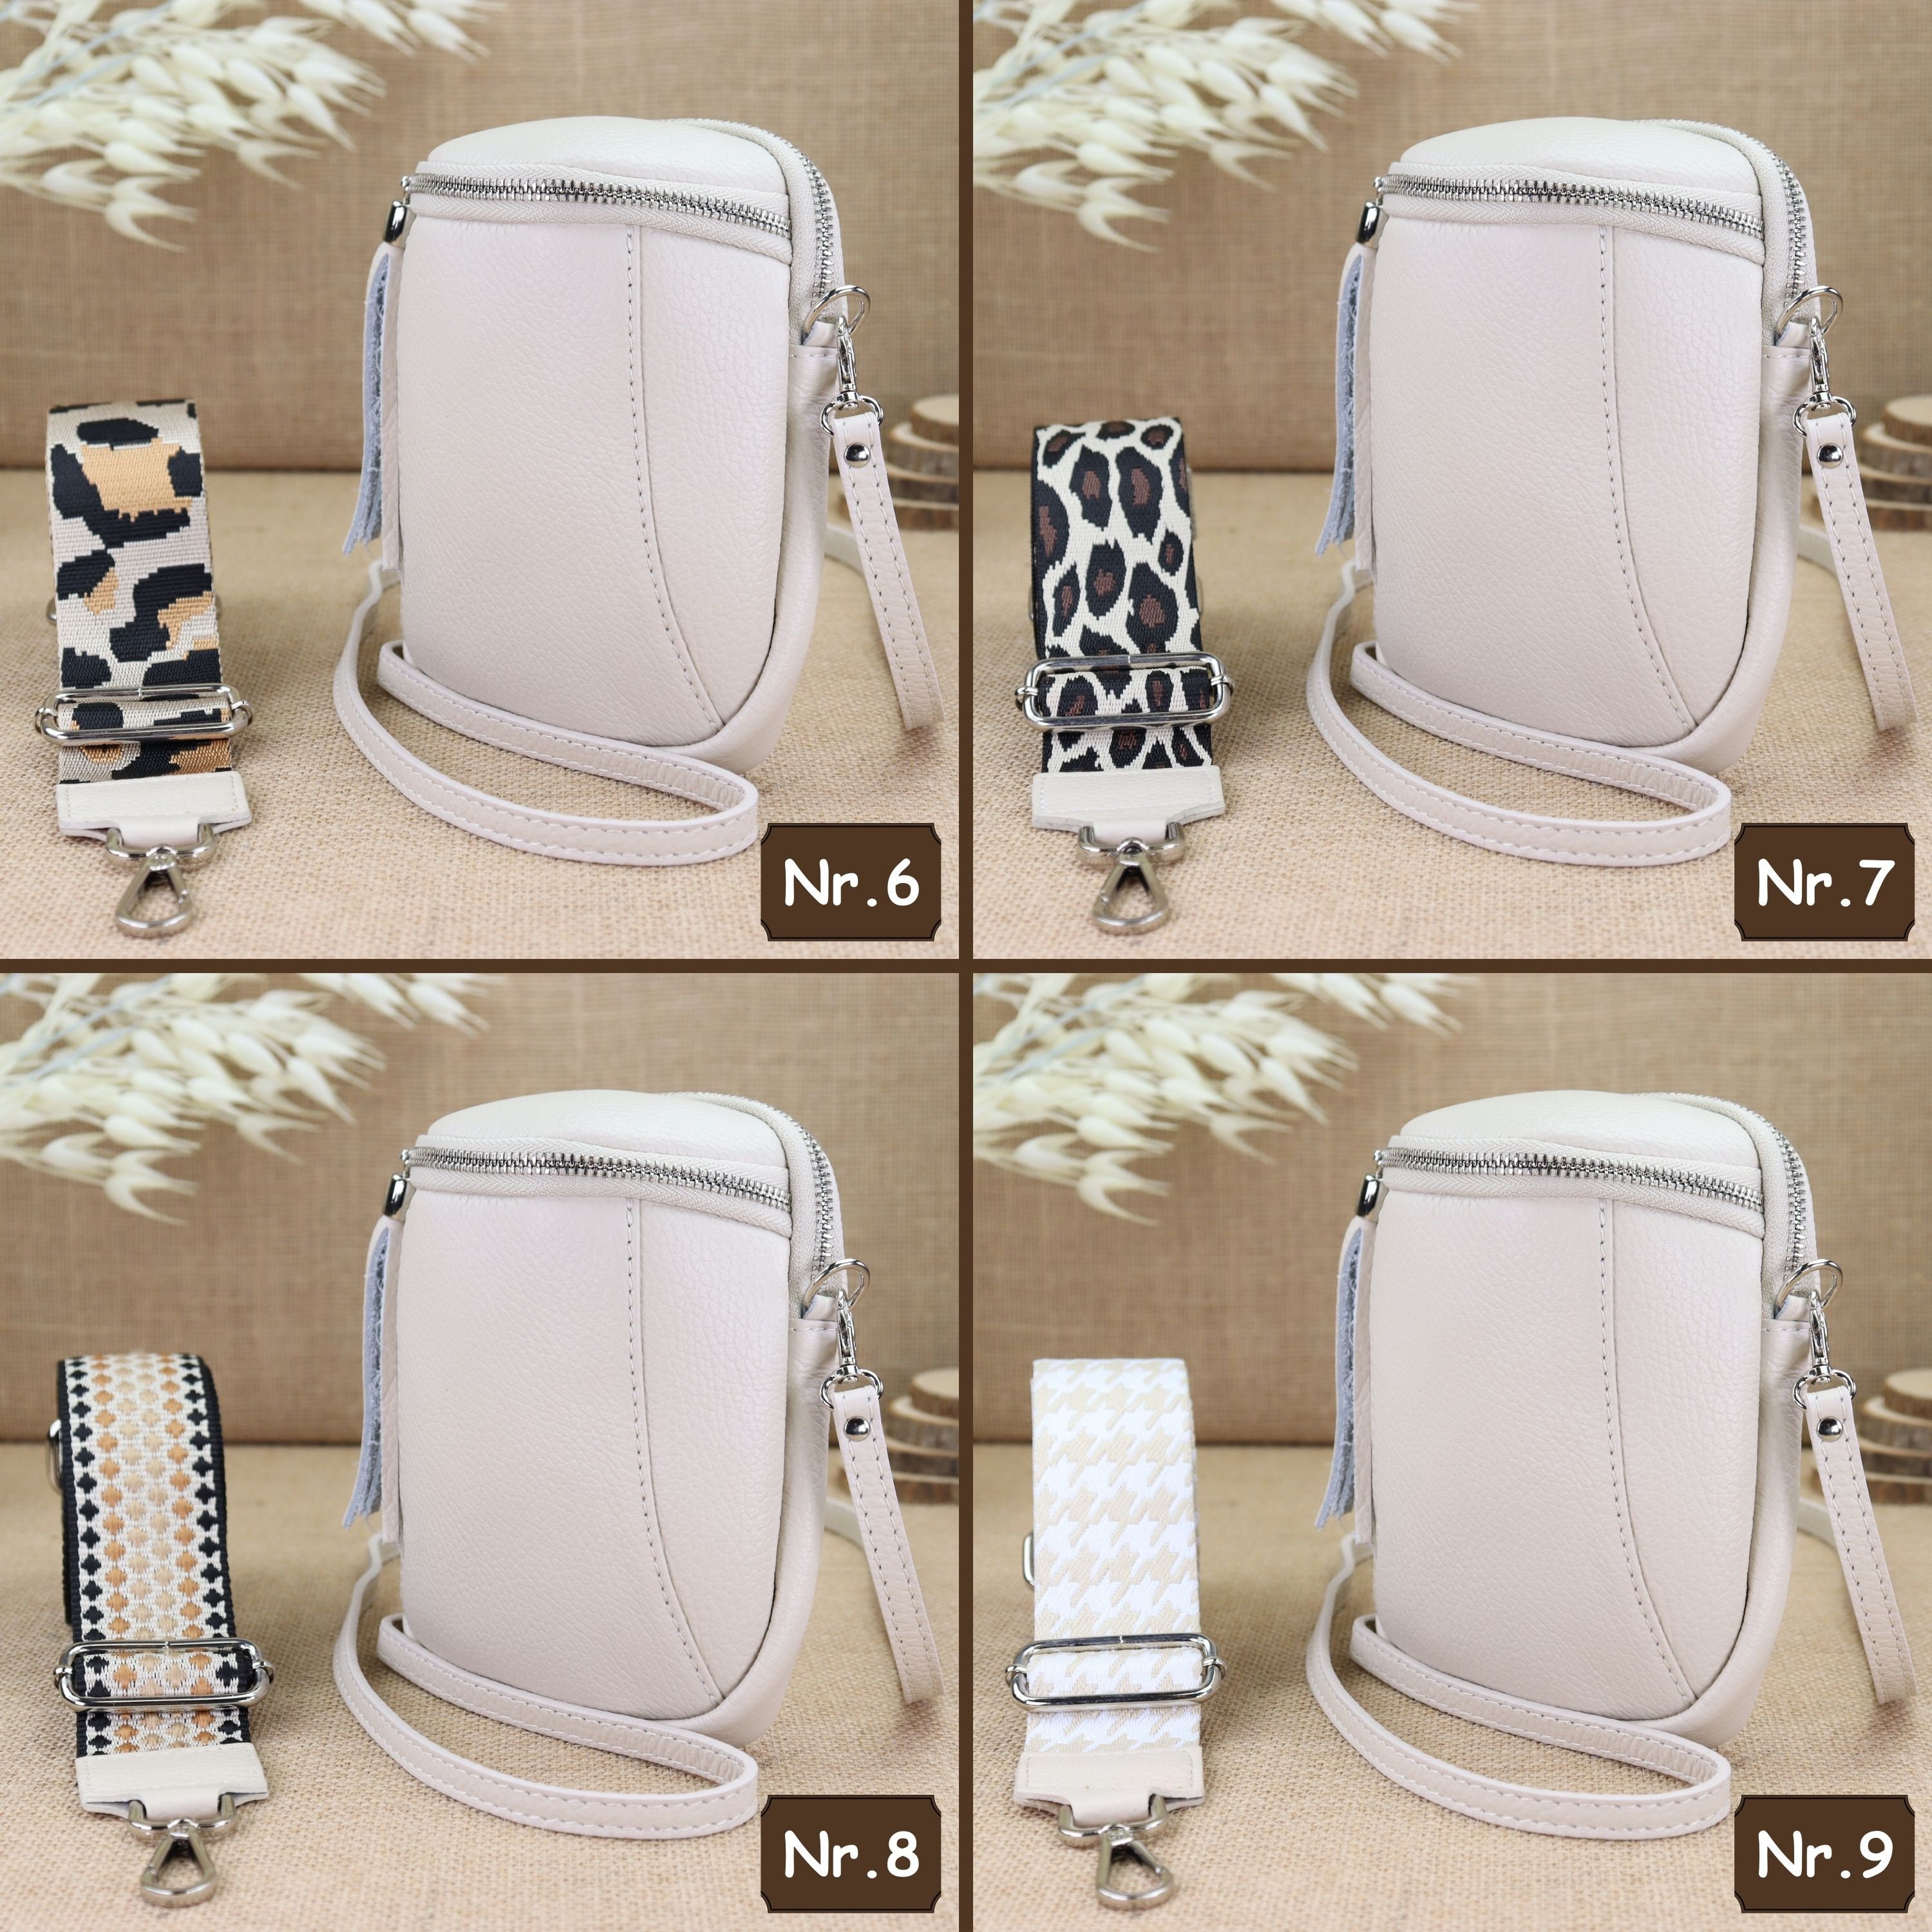 Cream Leather Bum Bag for Women With 2 Straps and Silver 